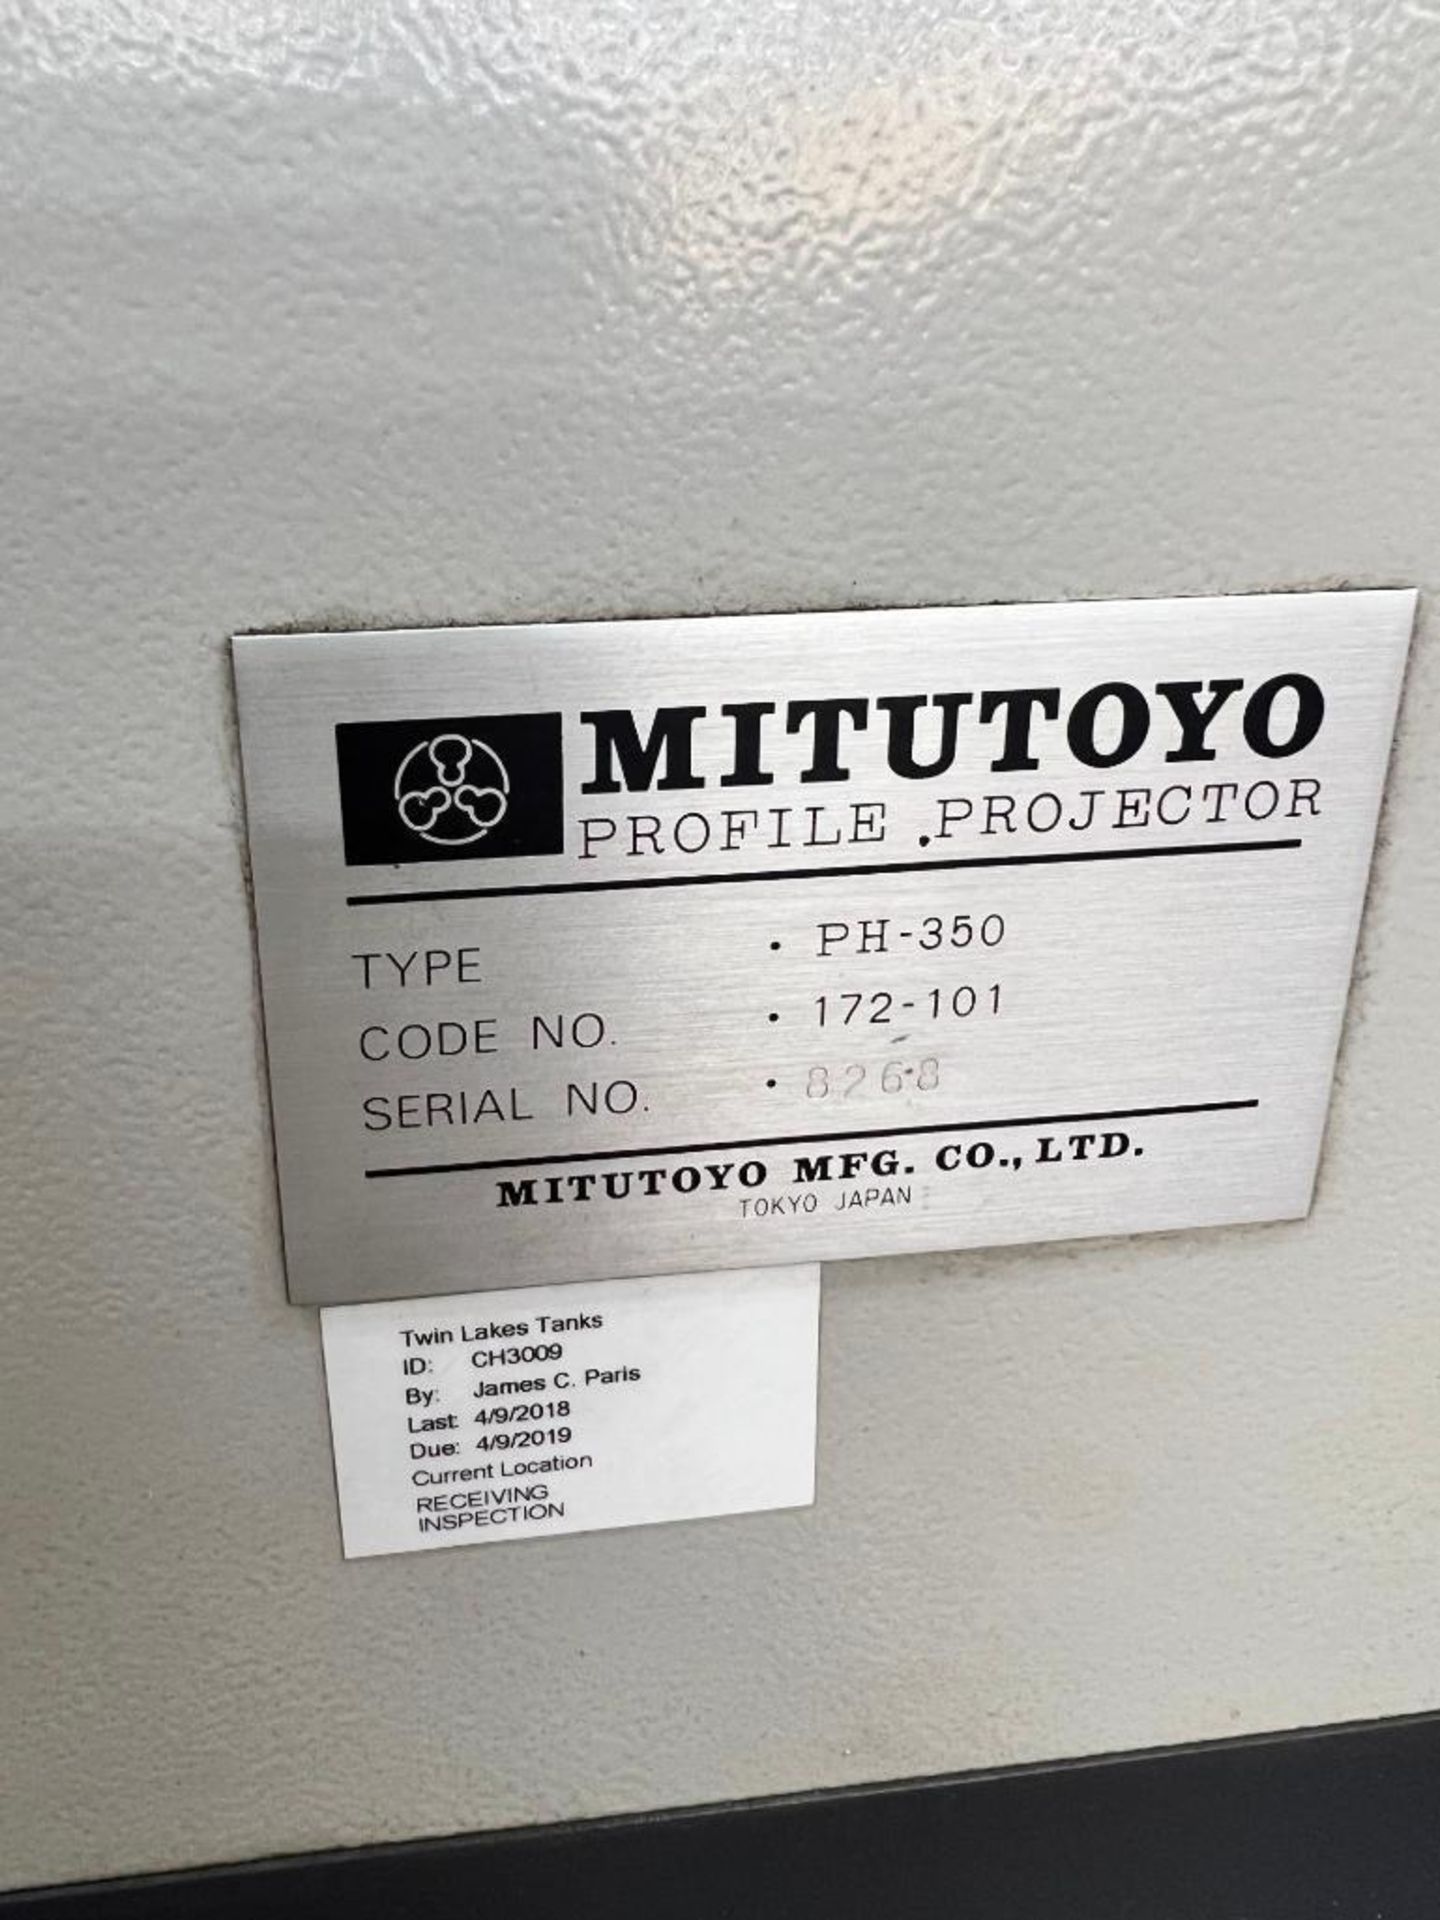 MITUTOYO PROFILE PROJECTOR, TYPE PH-350, S/N 8268, CODE NO. 172-101, W/ CART - Image 7 of 8